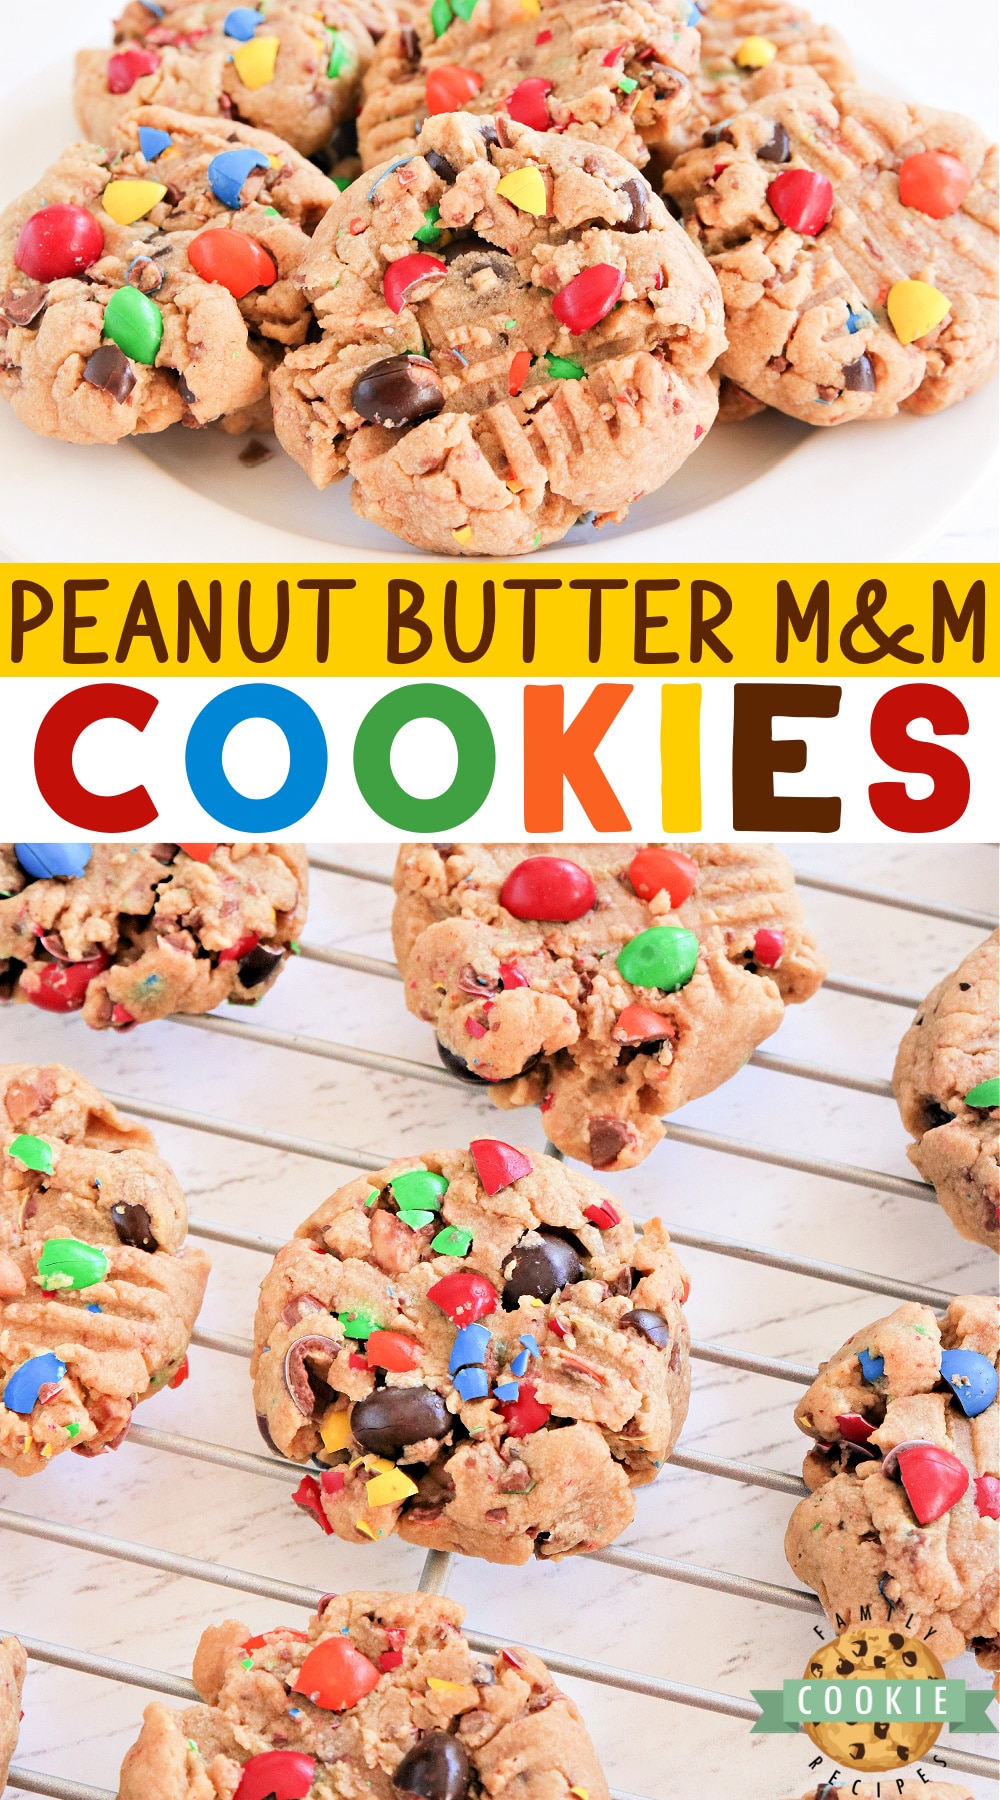 Peanut Butter M&M Cookies are soft, chewy and packed with peanut butter flavor! Our favorite peanut butter cookie recipe is even better with Peanut Butter M&Ms! 